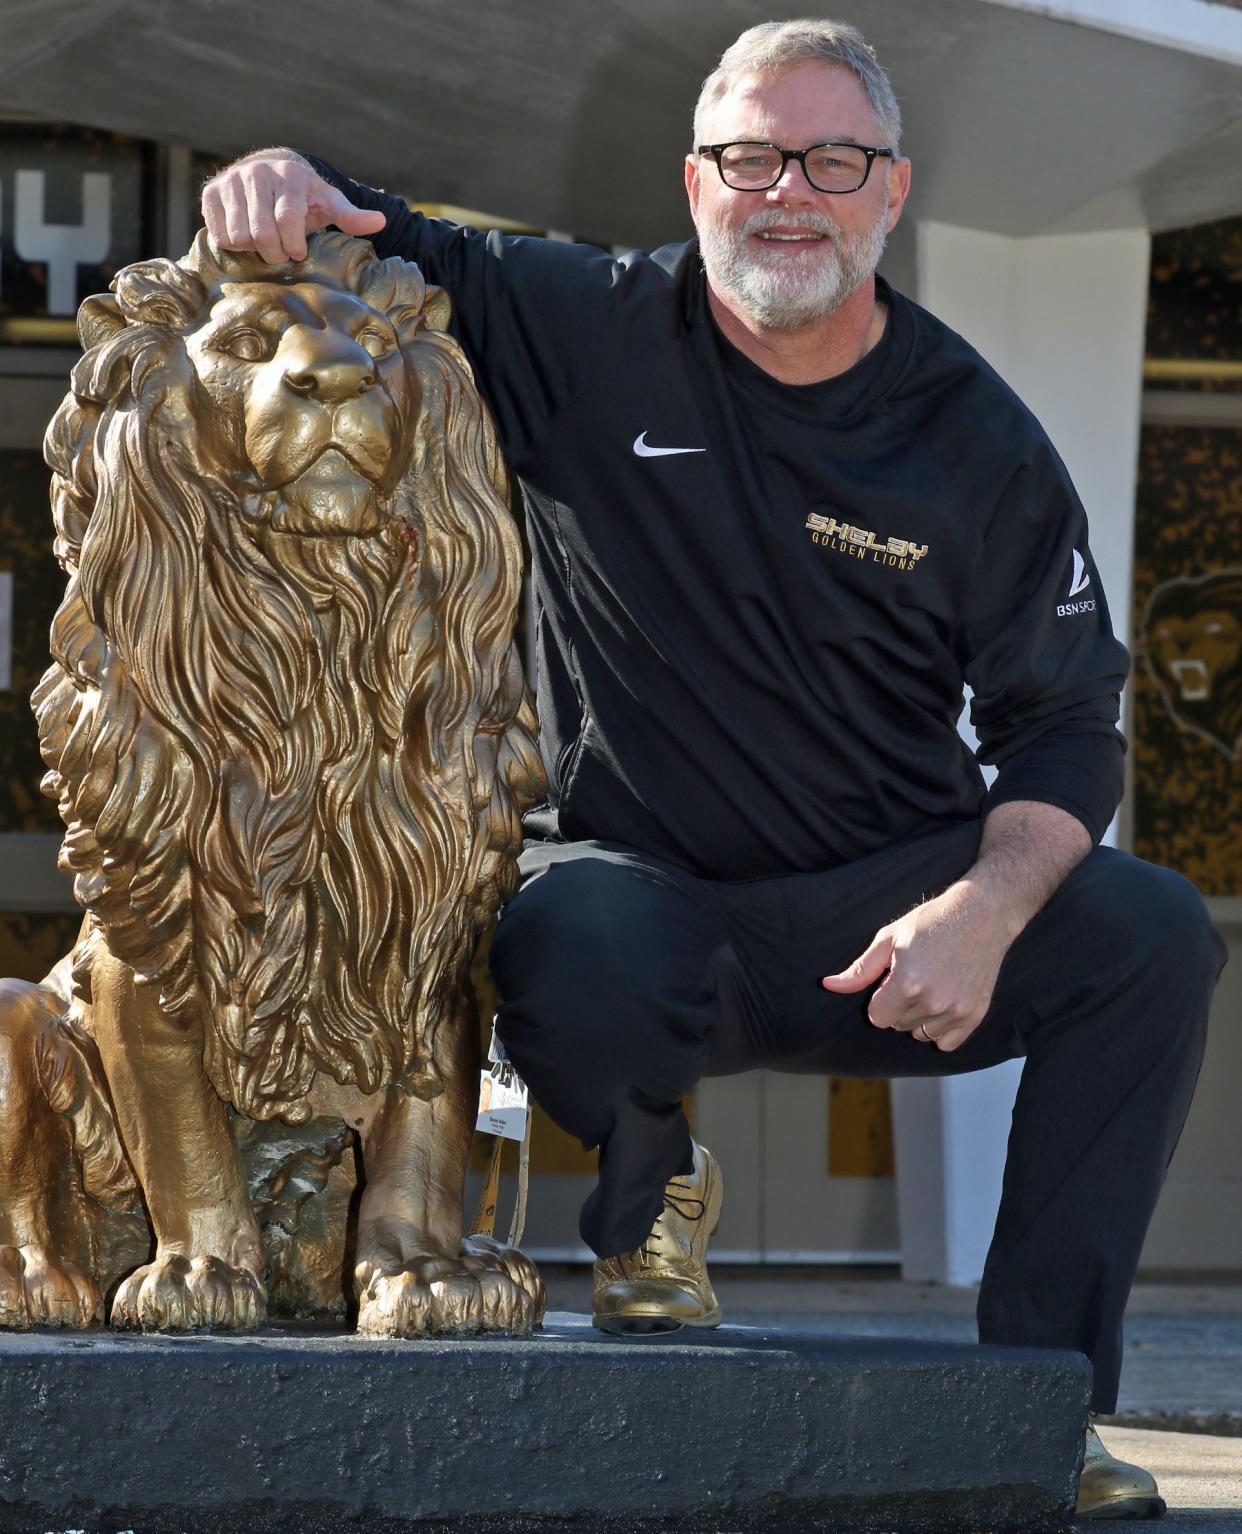 Principal David Allen poses next to the lion statue outside Shelby High School Friday morning, Jan. 13, 2023.